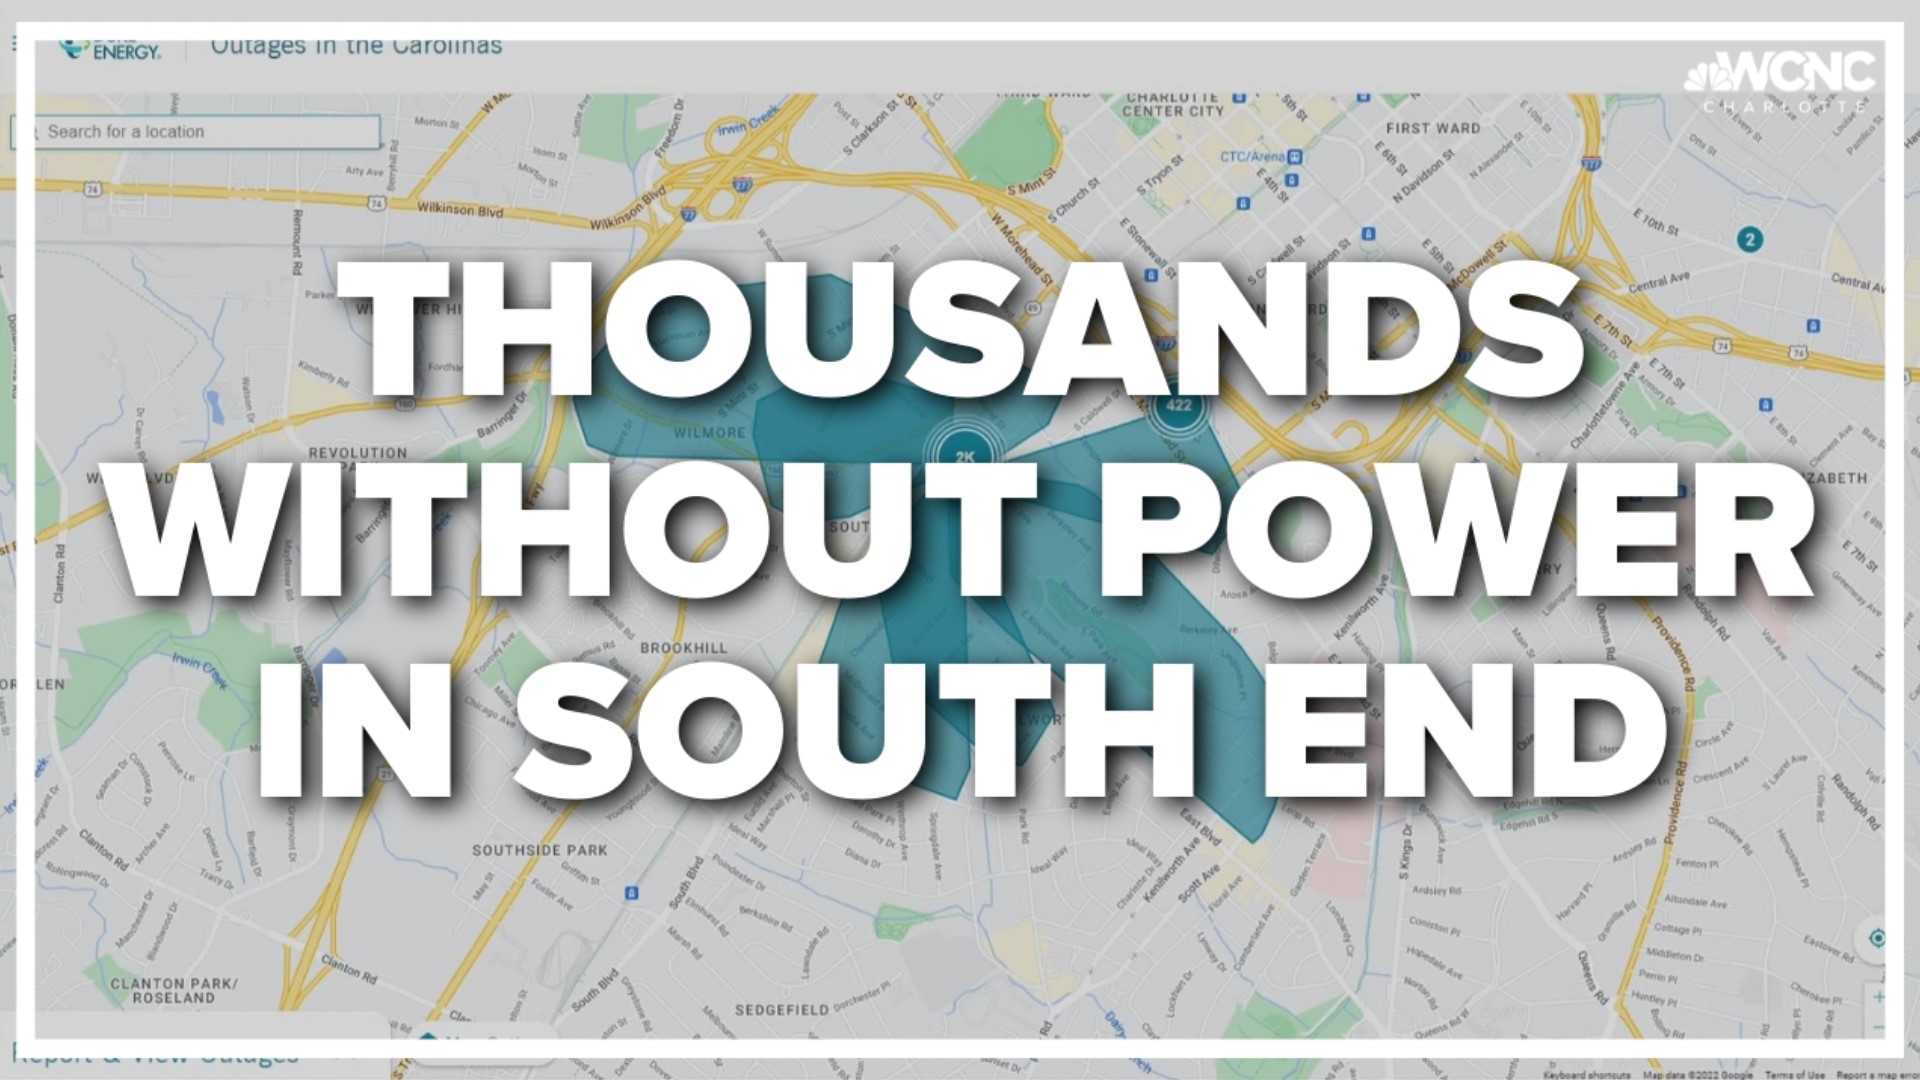 About 2,000 Duke Energy customers are without power following an electric issue Thursday.